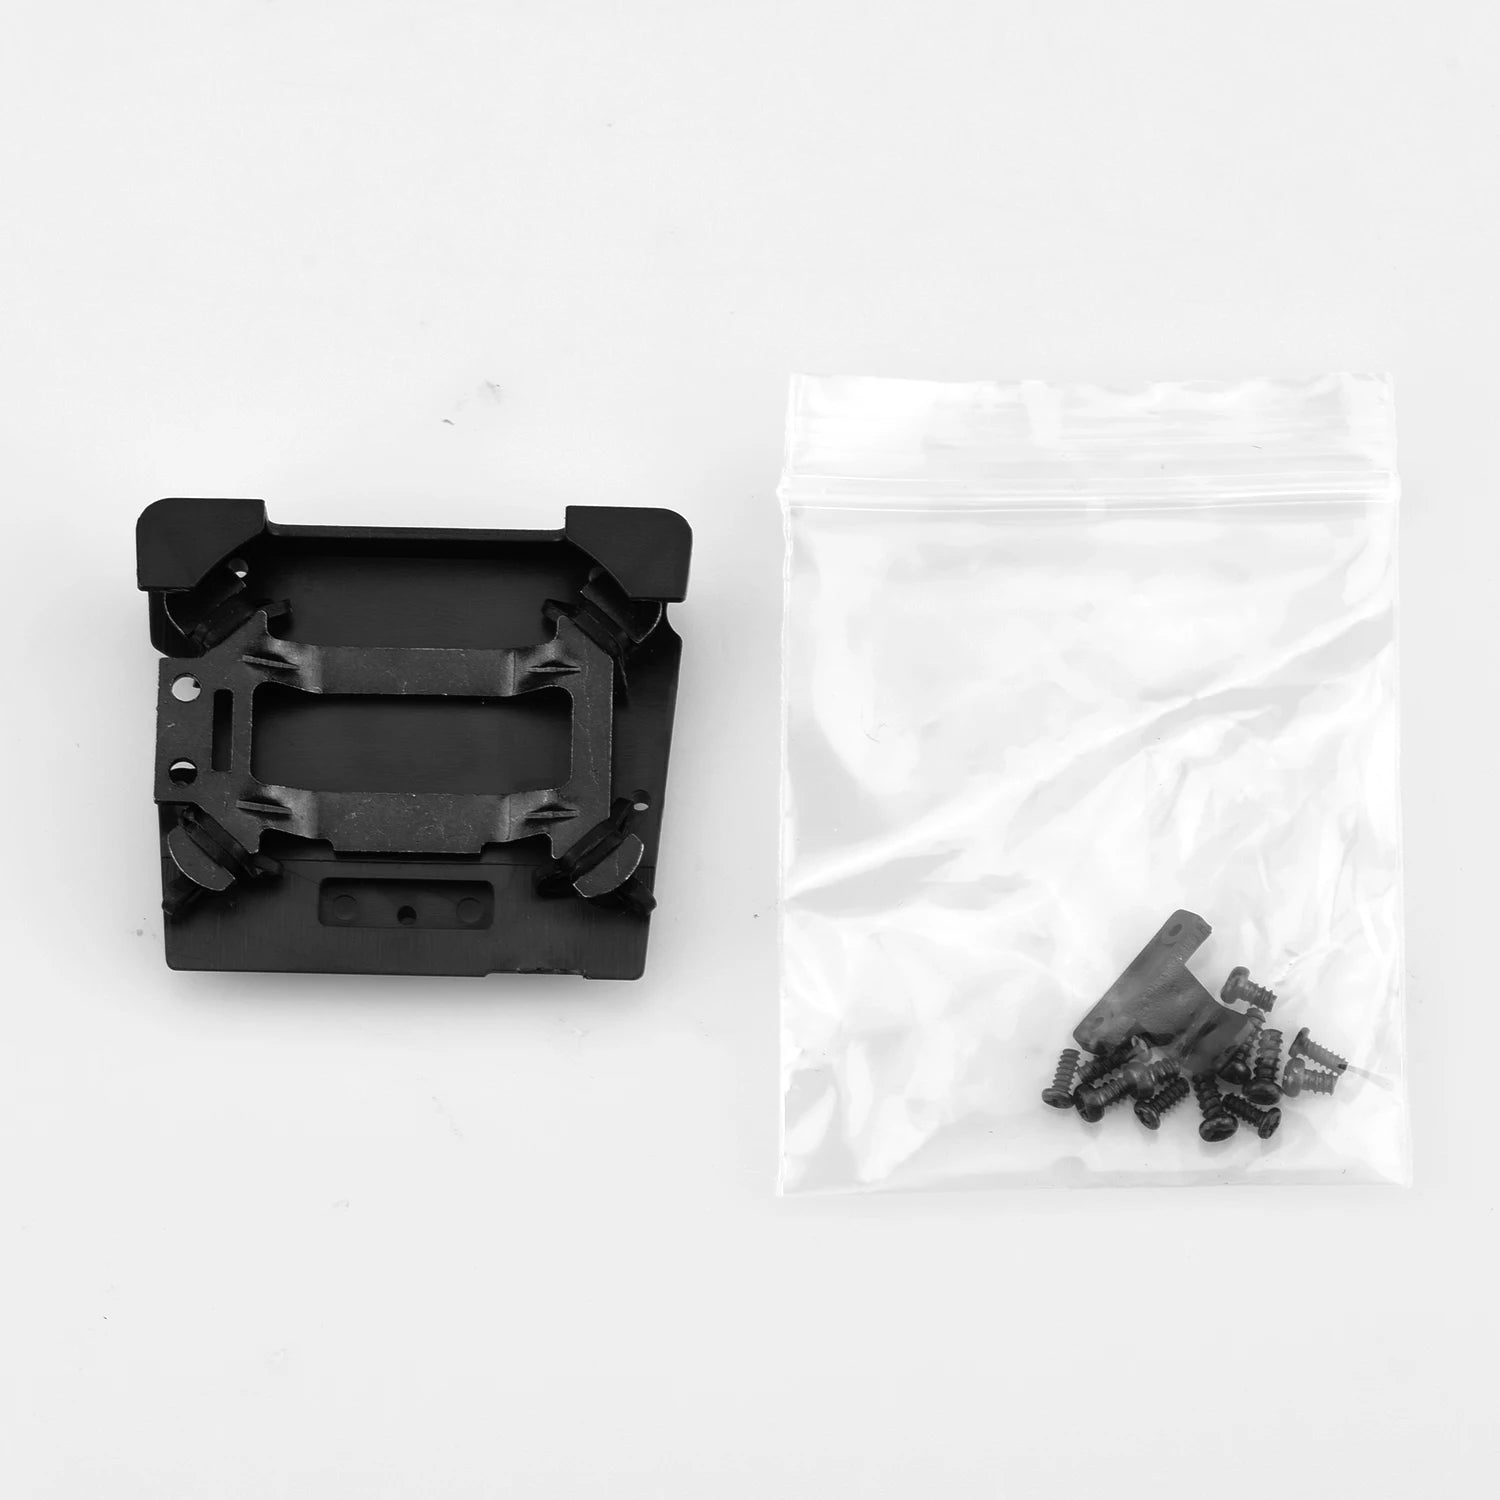 gimbal mount for DJI mavic pro comes with screws for easy installation .